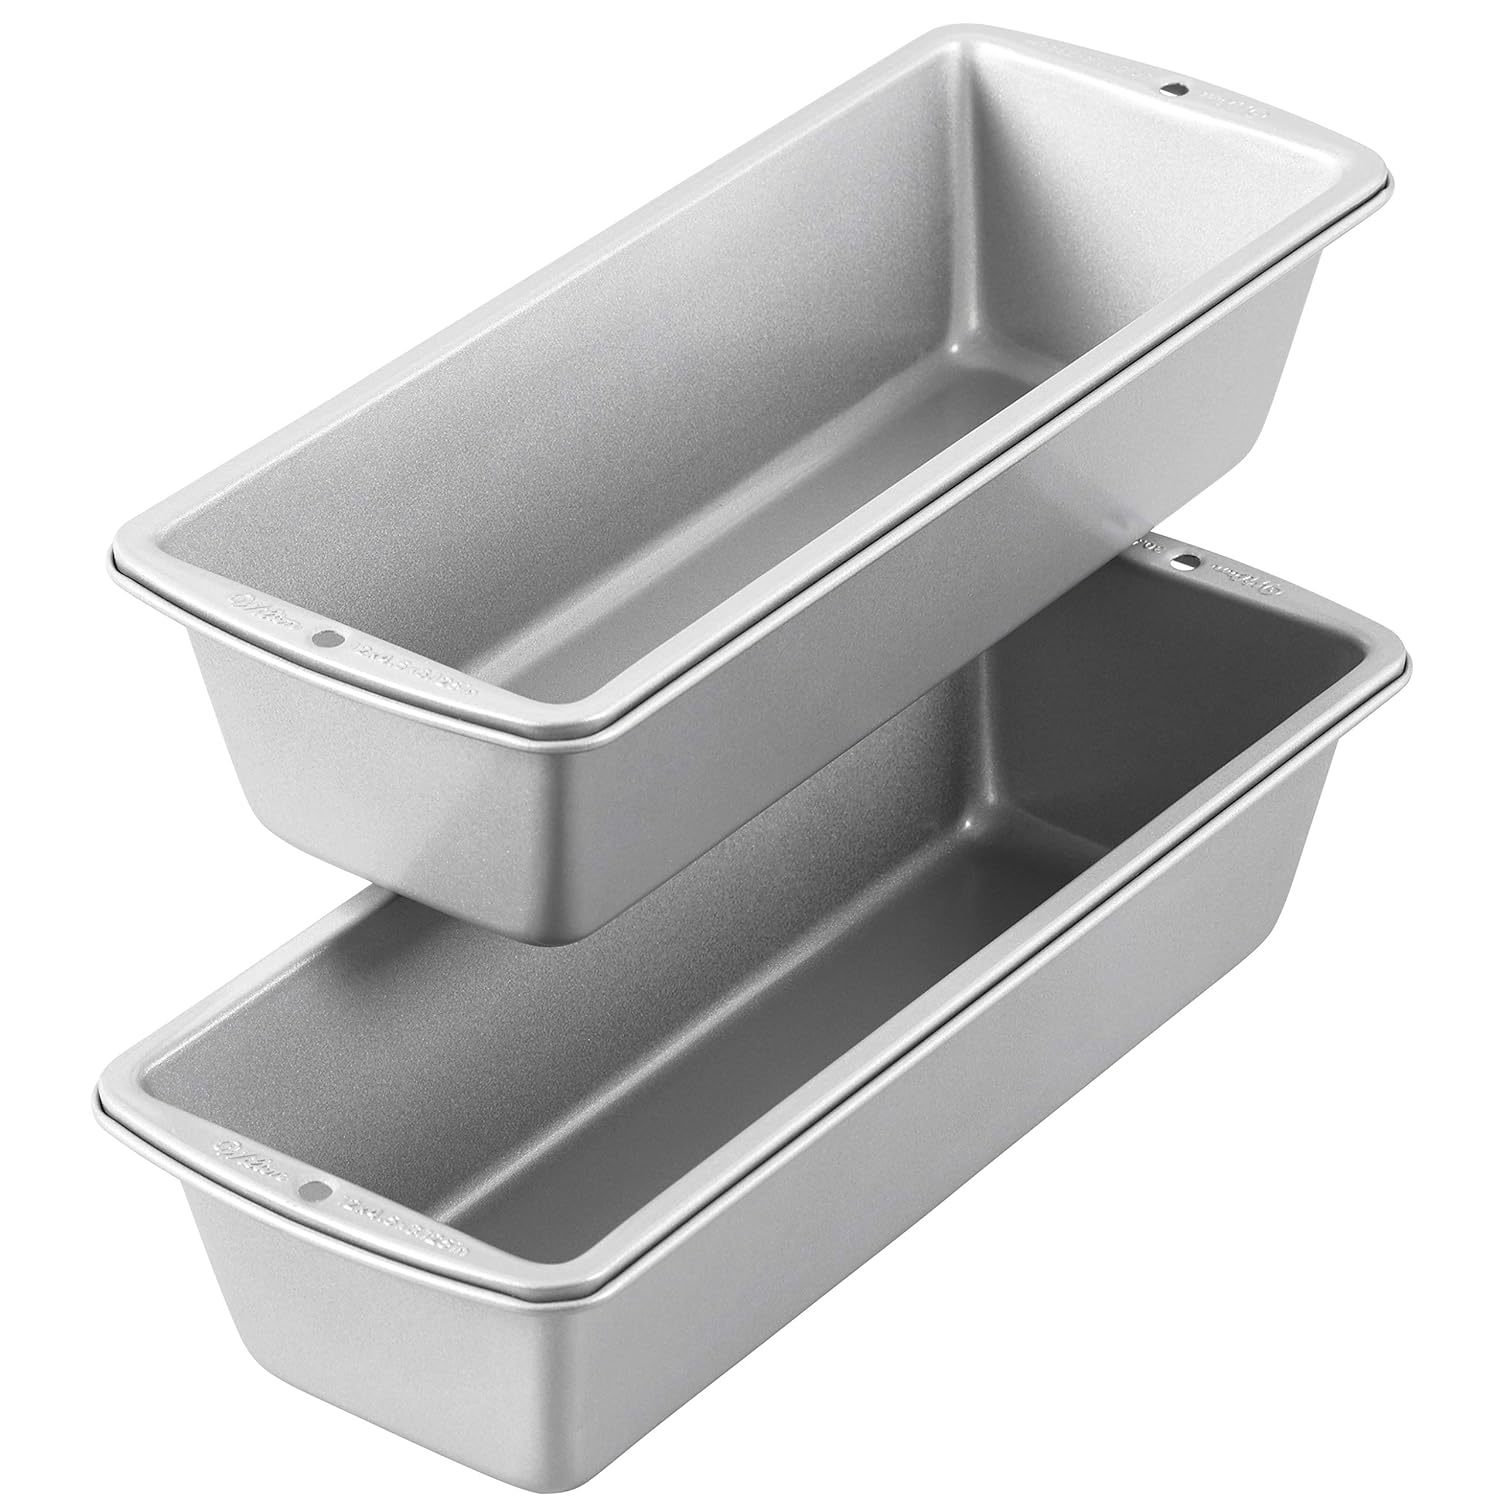 Norpro Stainless Steel Loaf Pan, 1 EA, As Shown